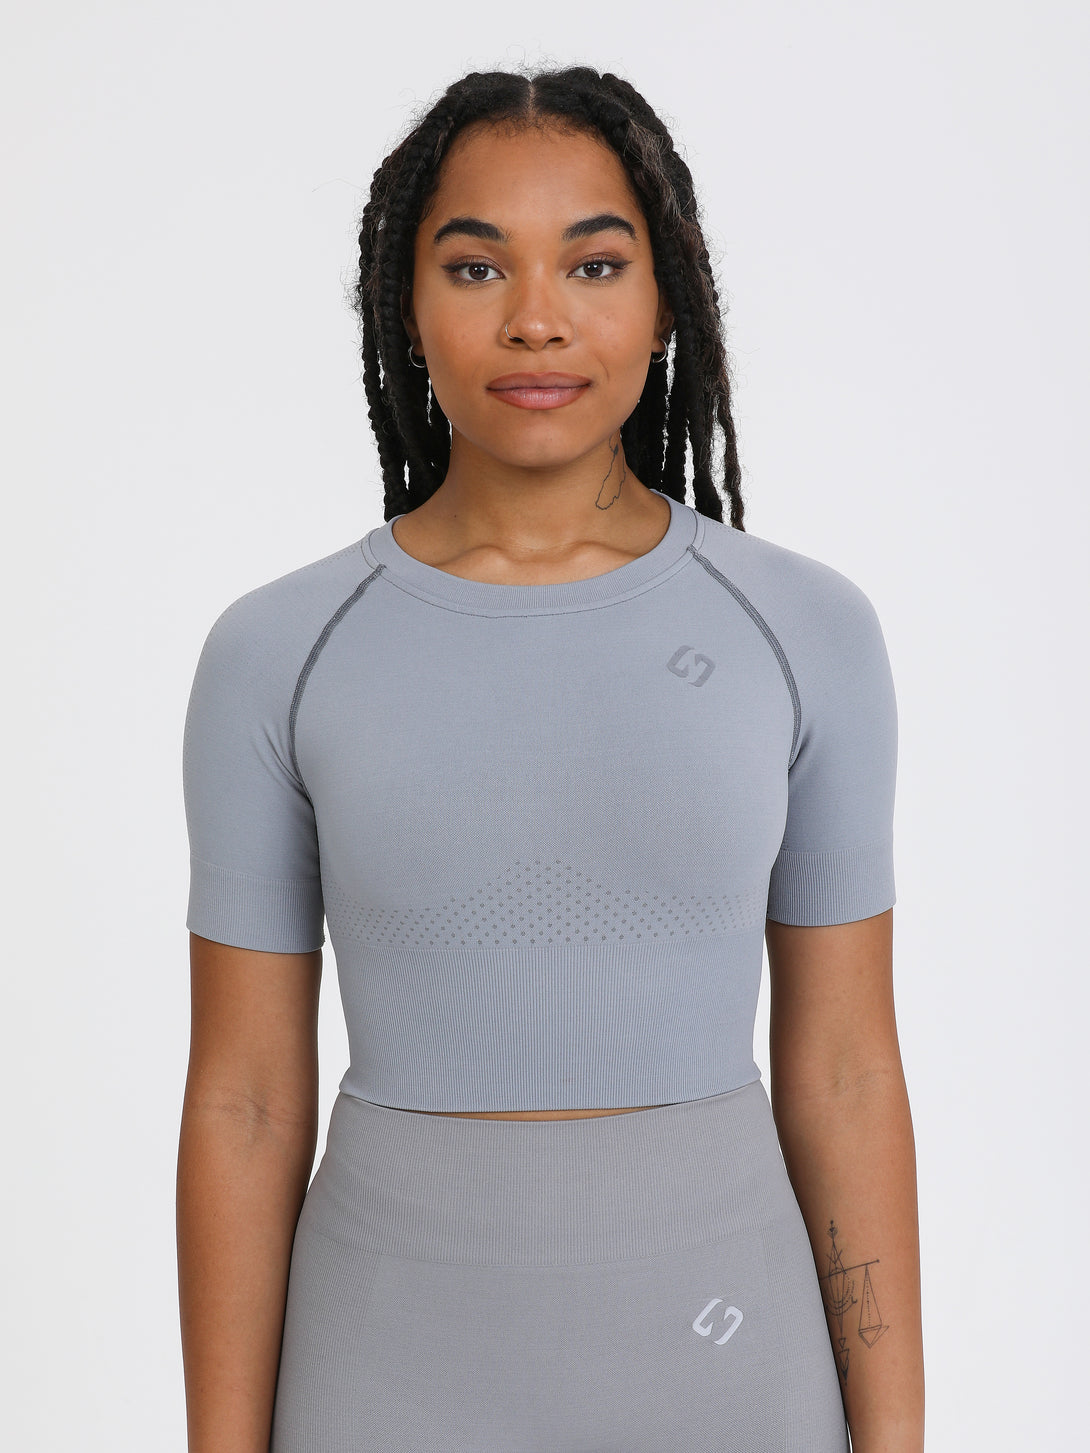 A Woman Wearing Dark GreyColor The Main Short Sleeve Crop Top